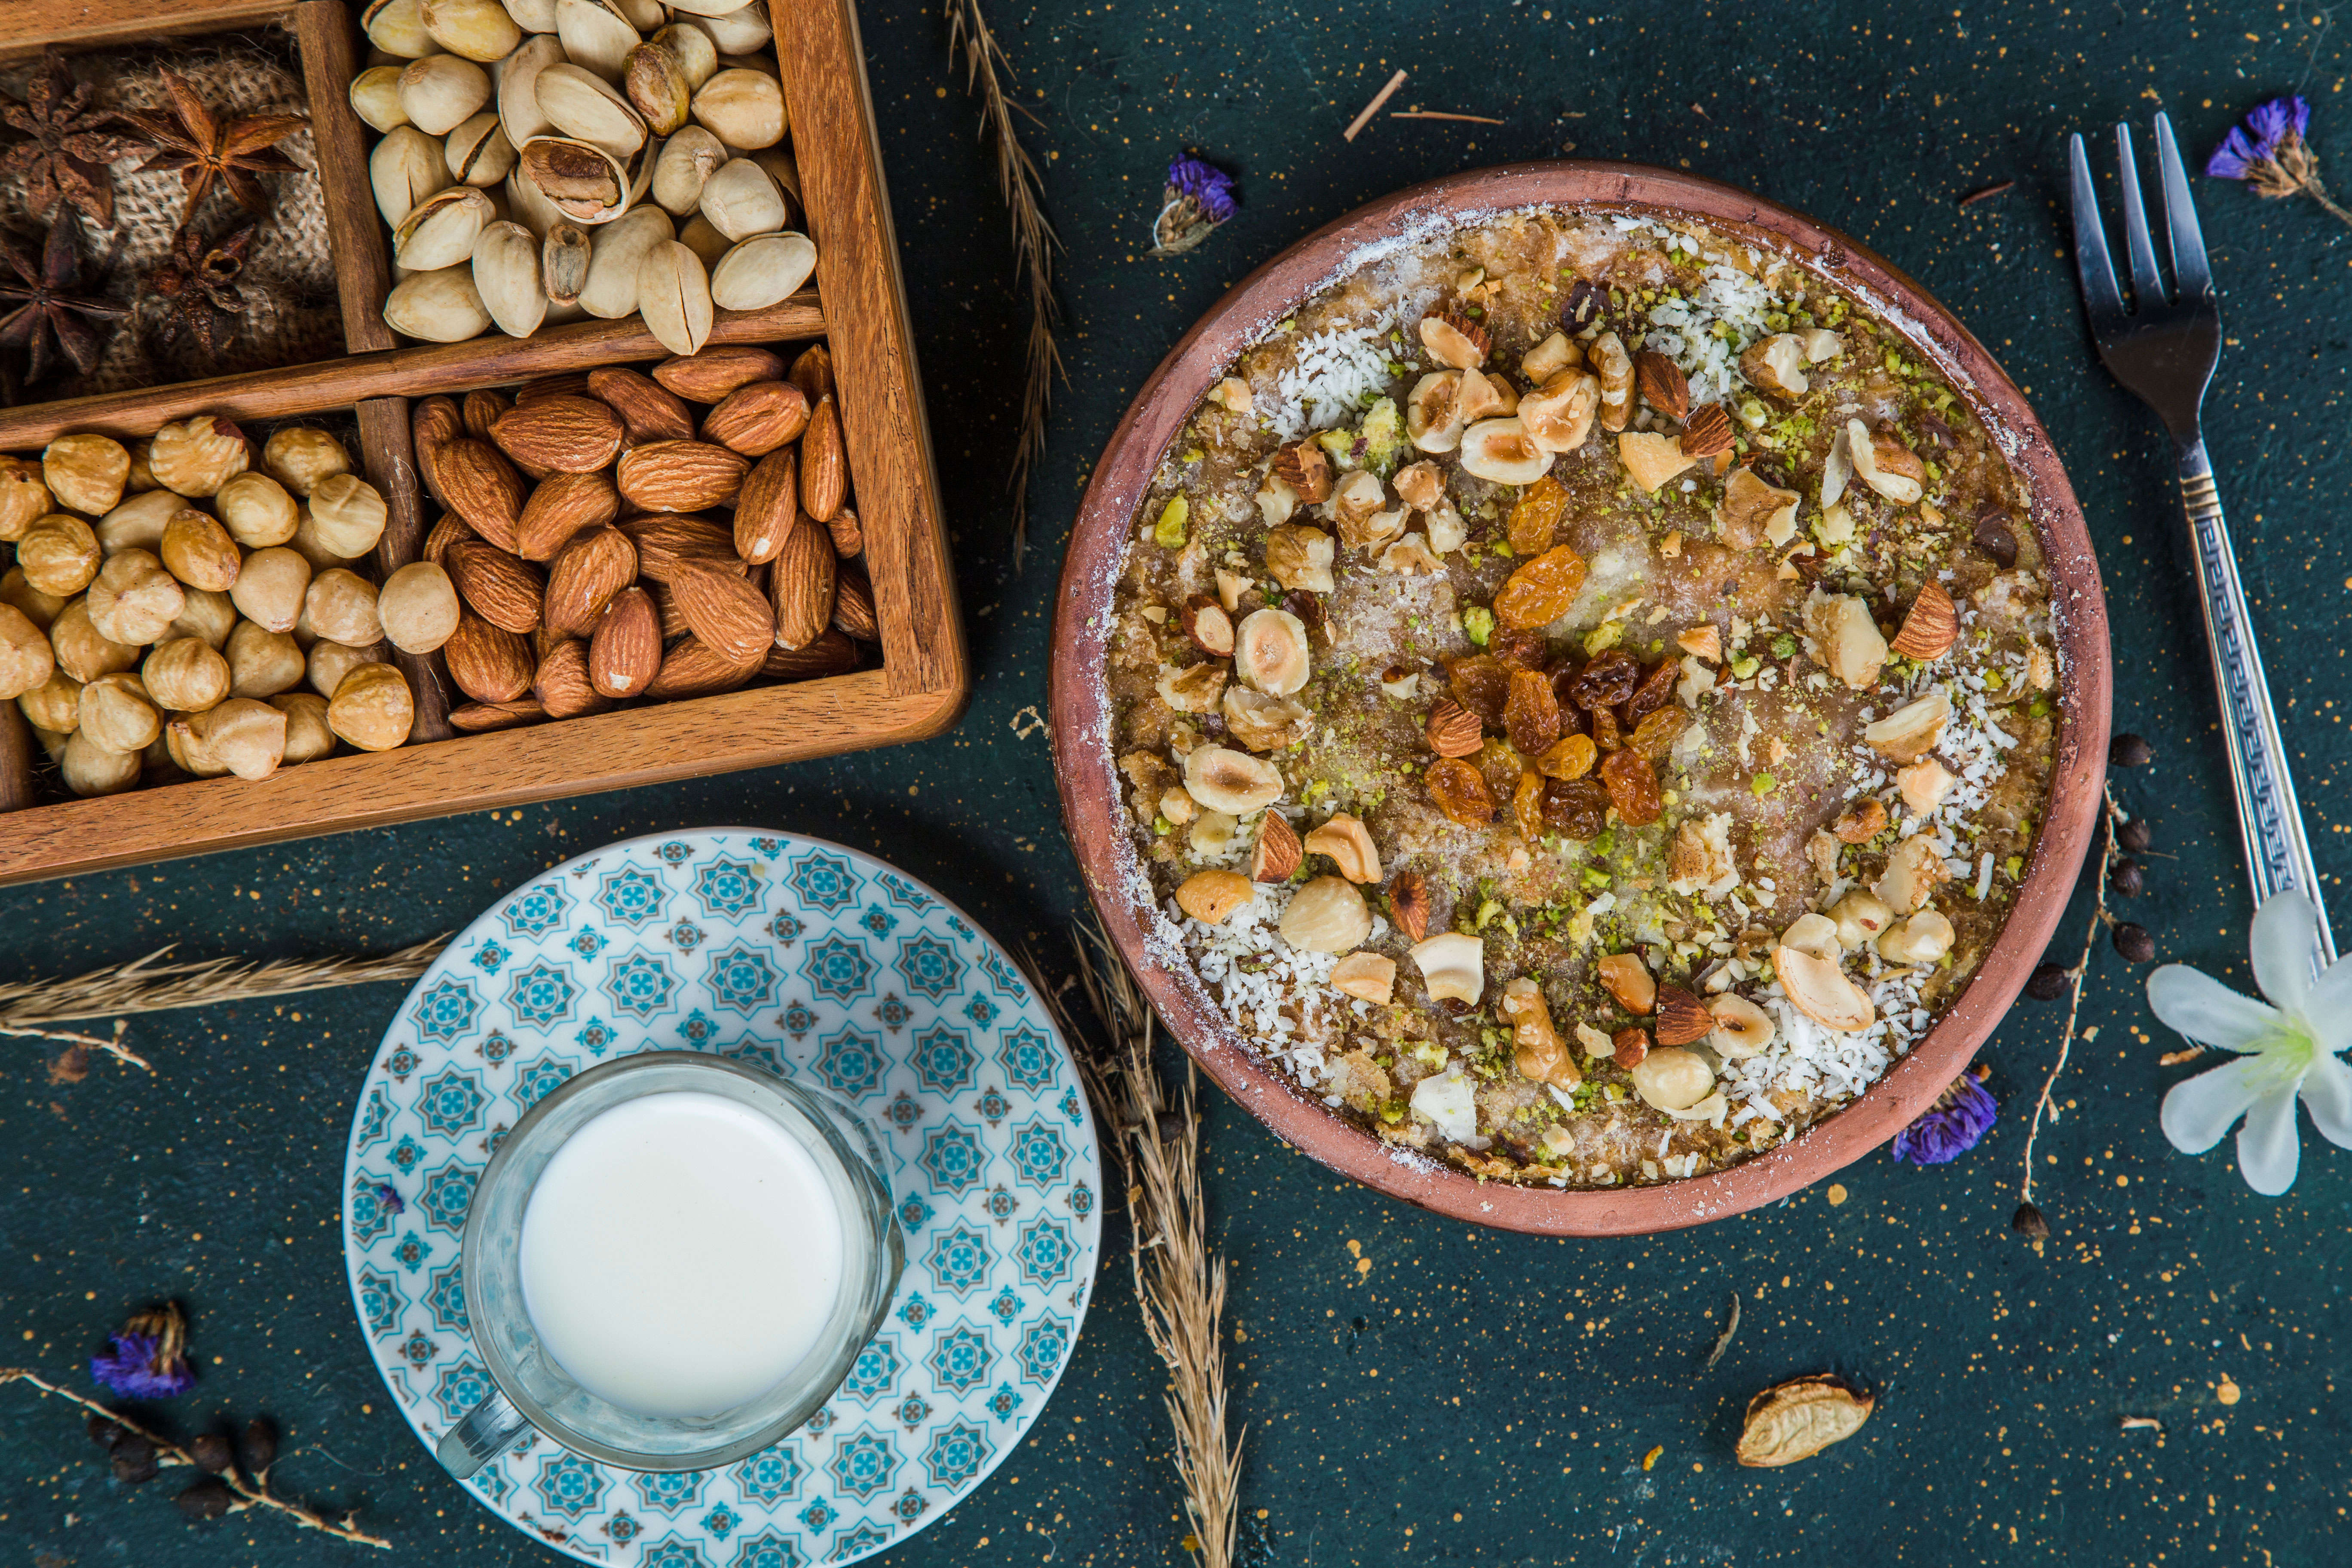 Umm Ali is made with sultanas, nuts and milk